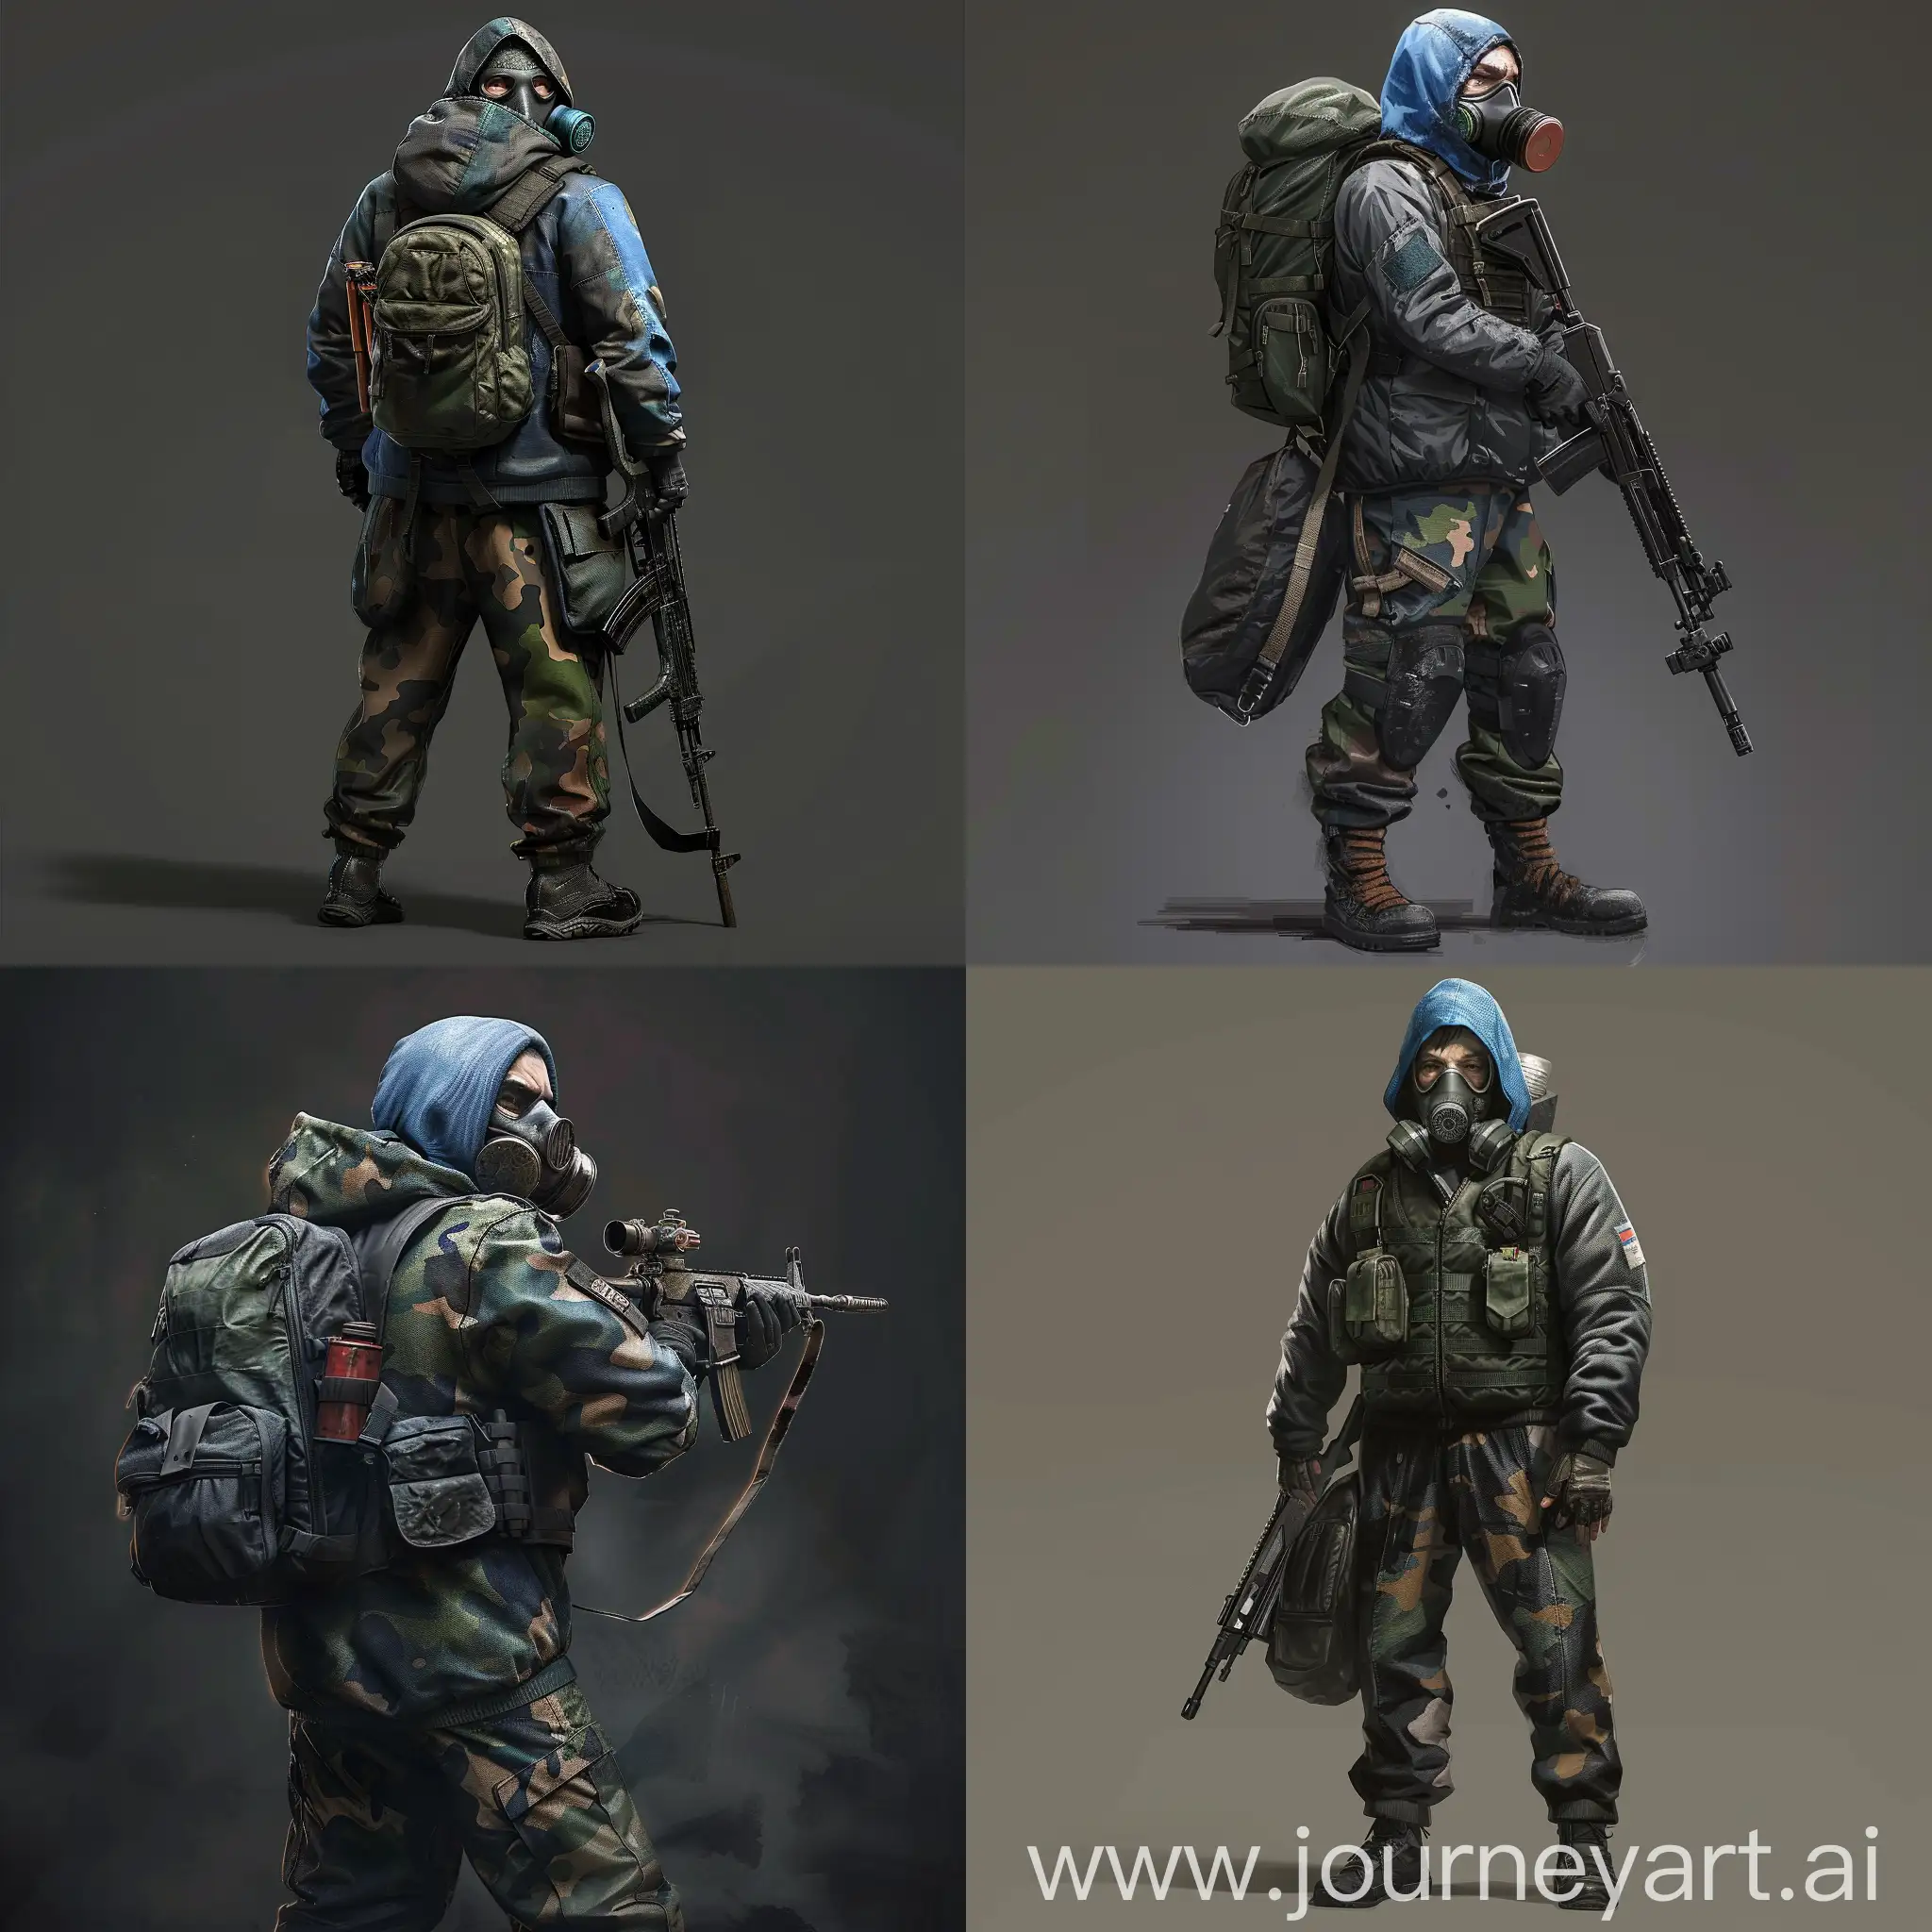 Stalker-Game-Character-in-Camouflage-Military-Gear-with-Sniper-Rifle